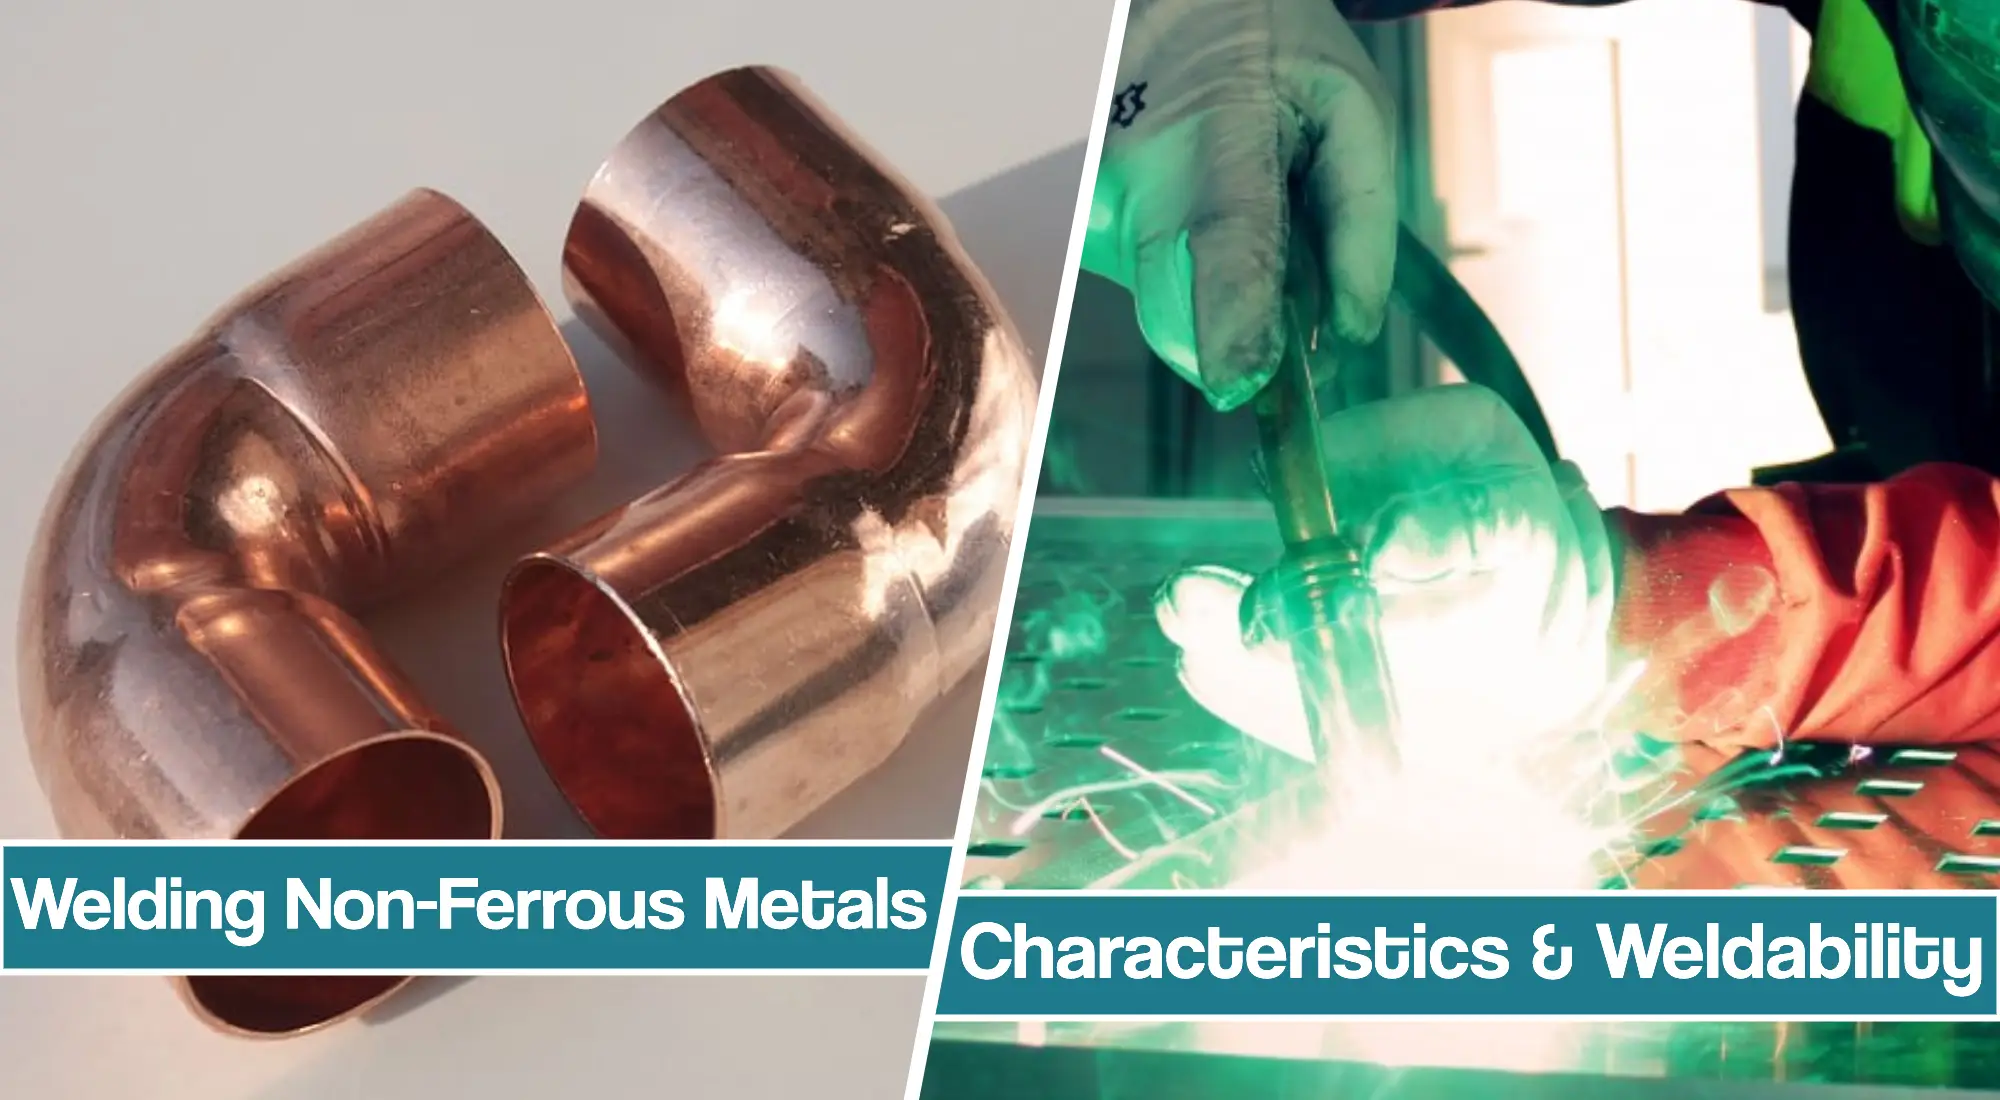 Welding non-ferrous metals – Detailed Explanation of Characteristics and Weldability